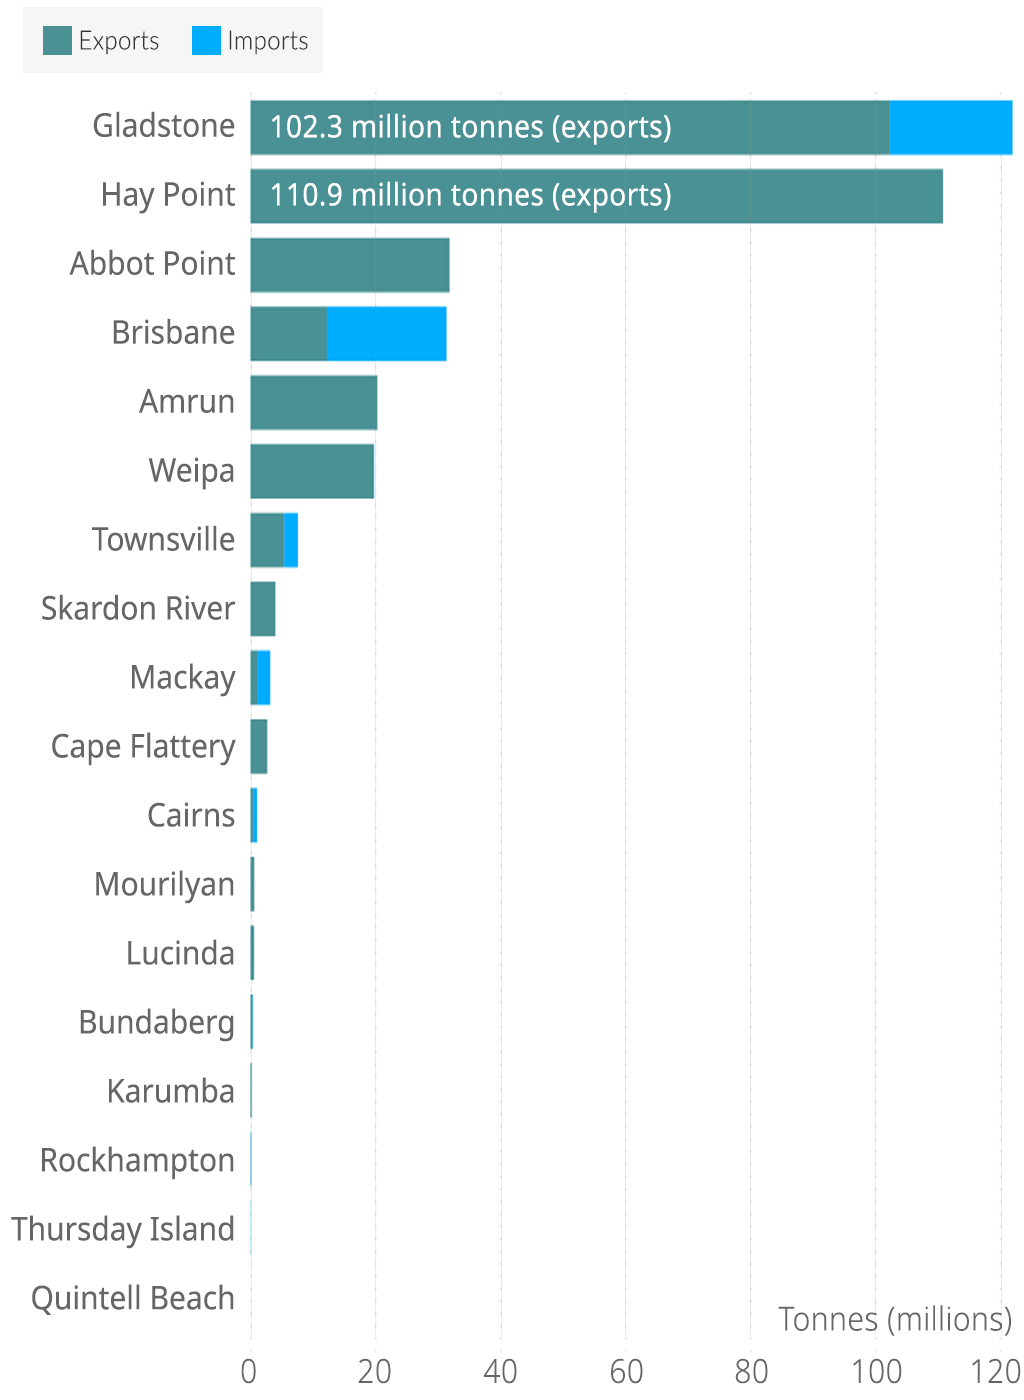 A chart showing the volume of exports and imports from each Queensland port in tonnes (millions) for the 2019-20 financial year.